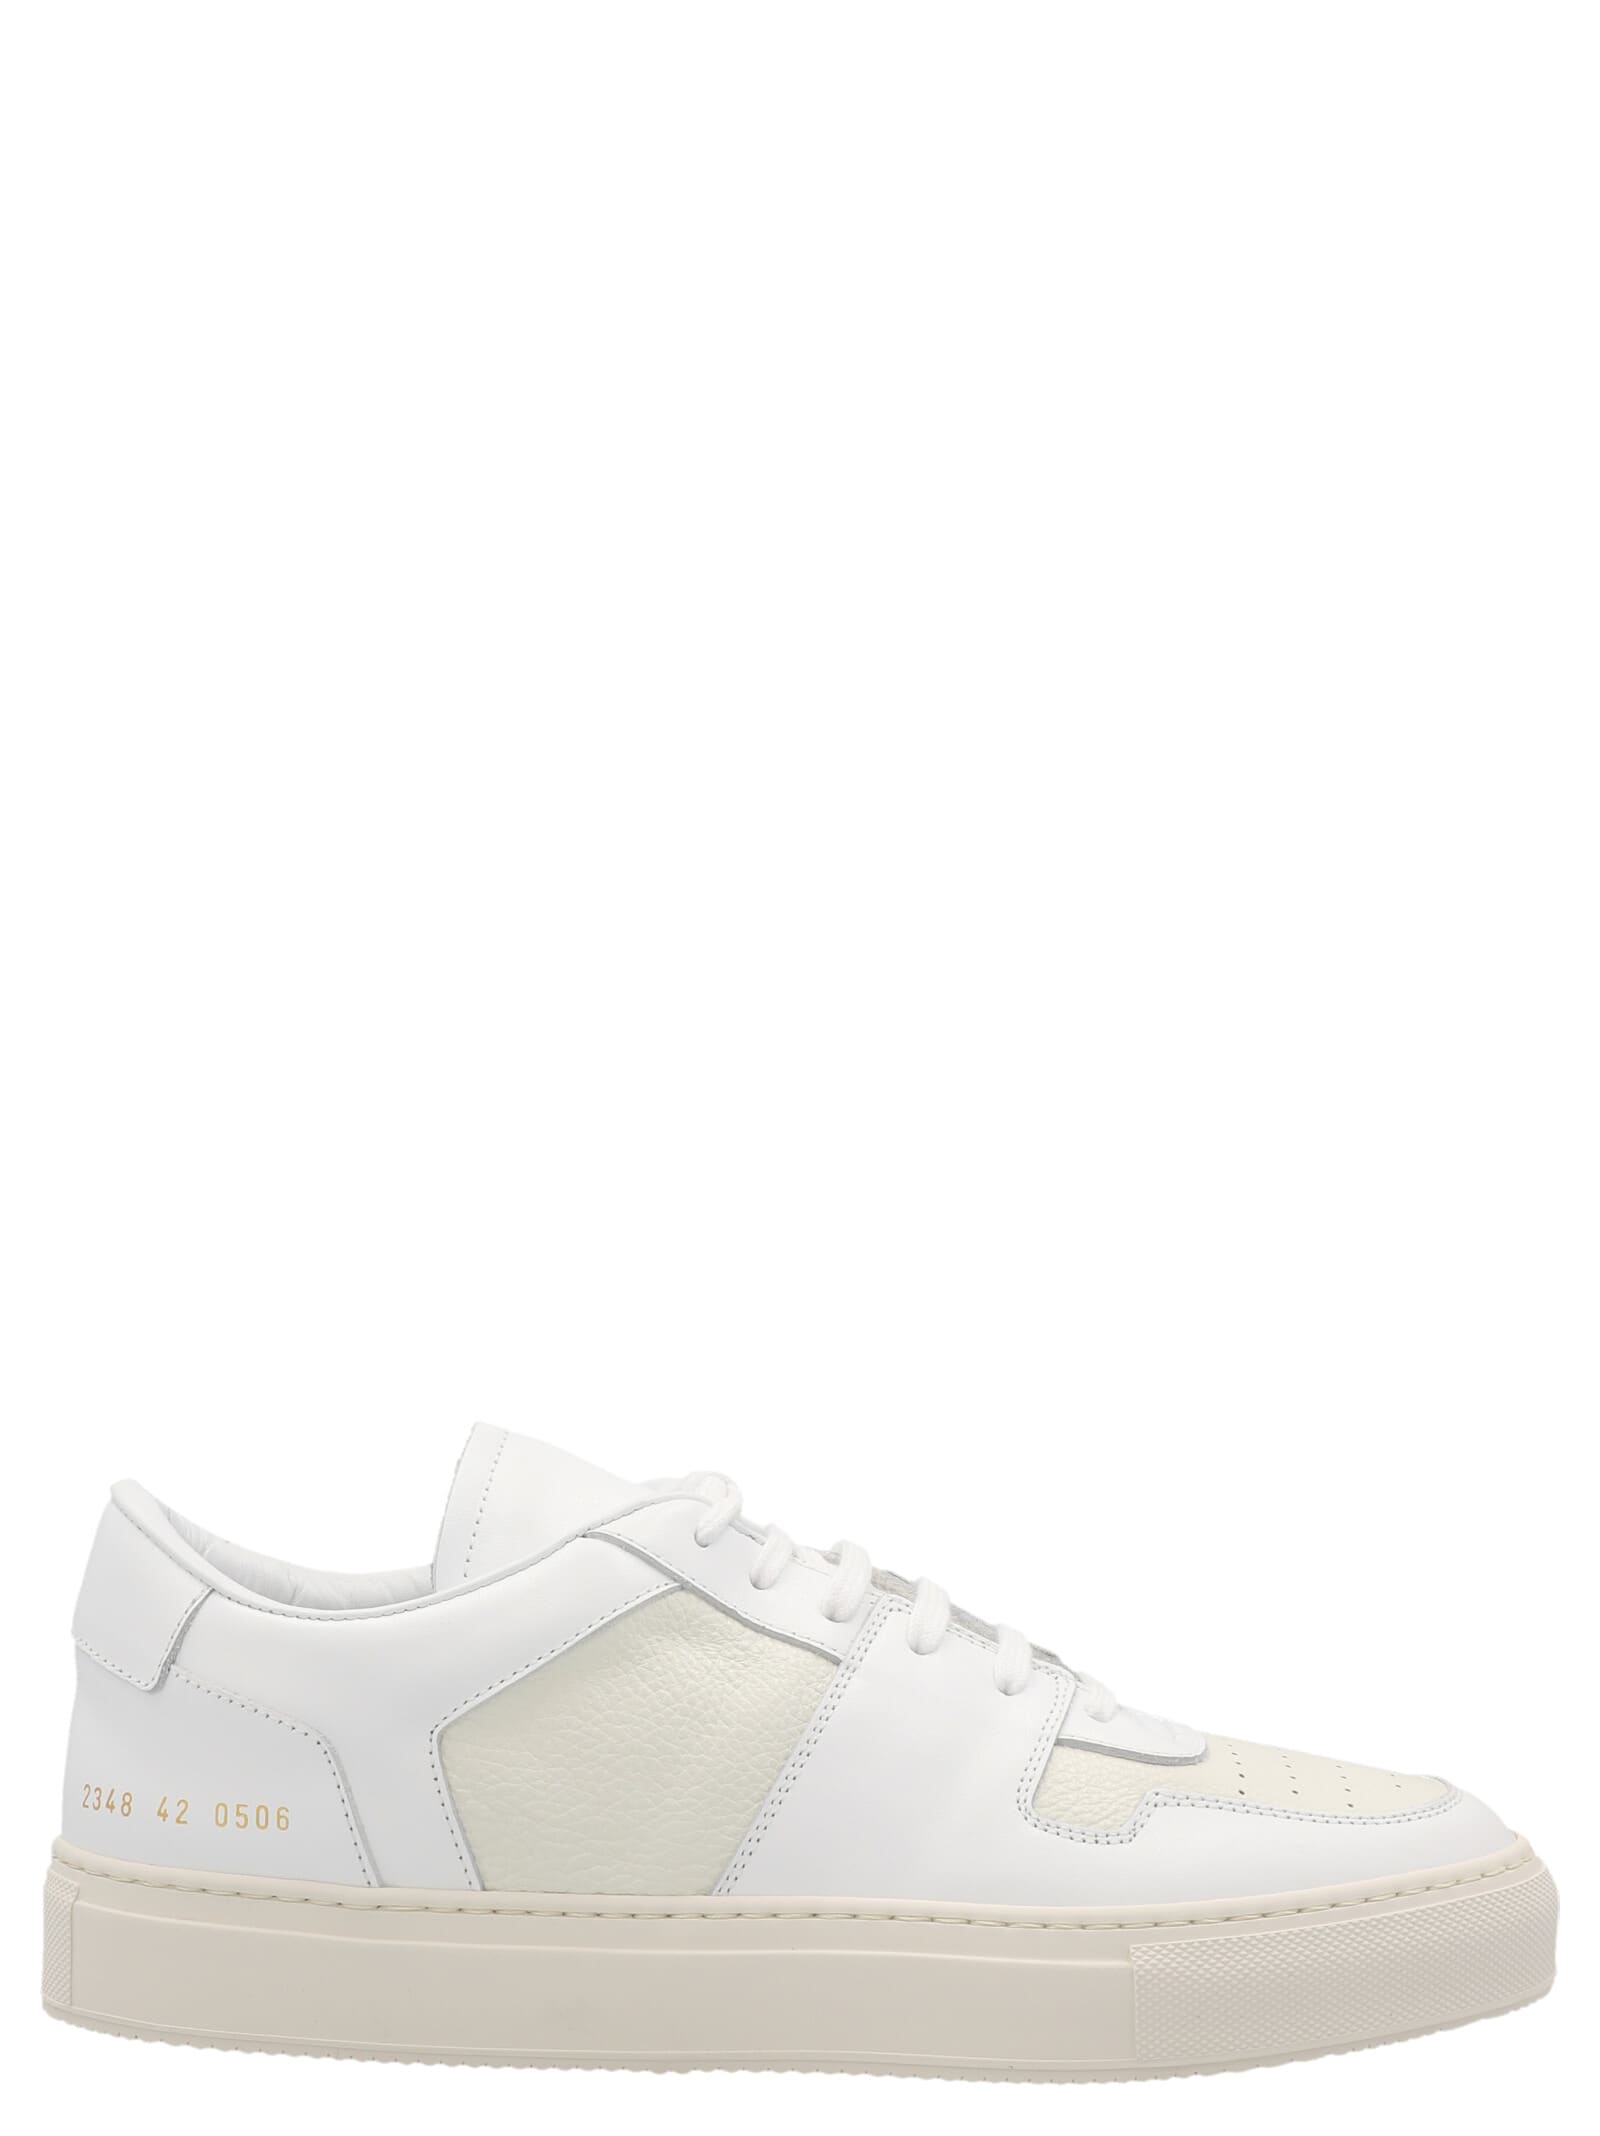 Common Projects decades Sneakers